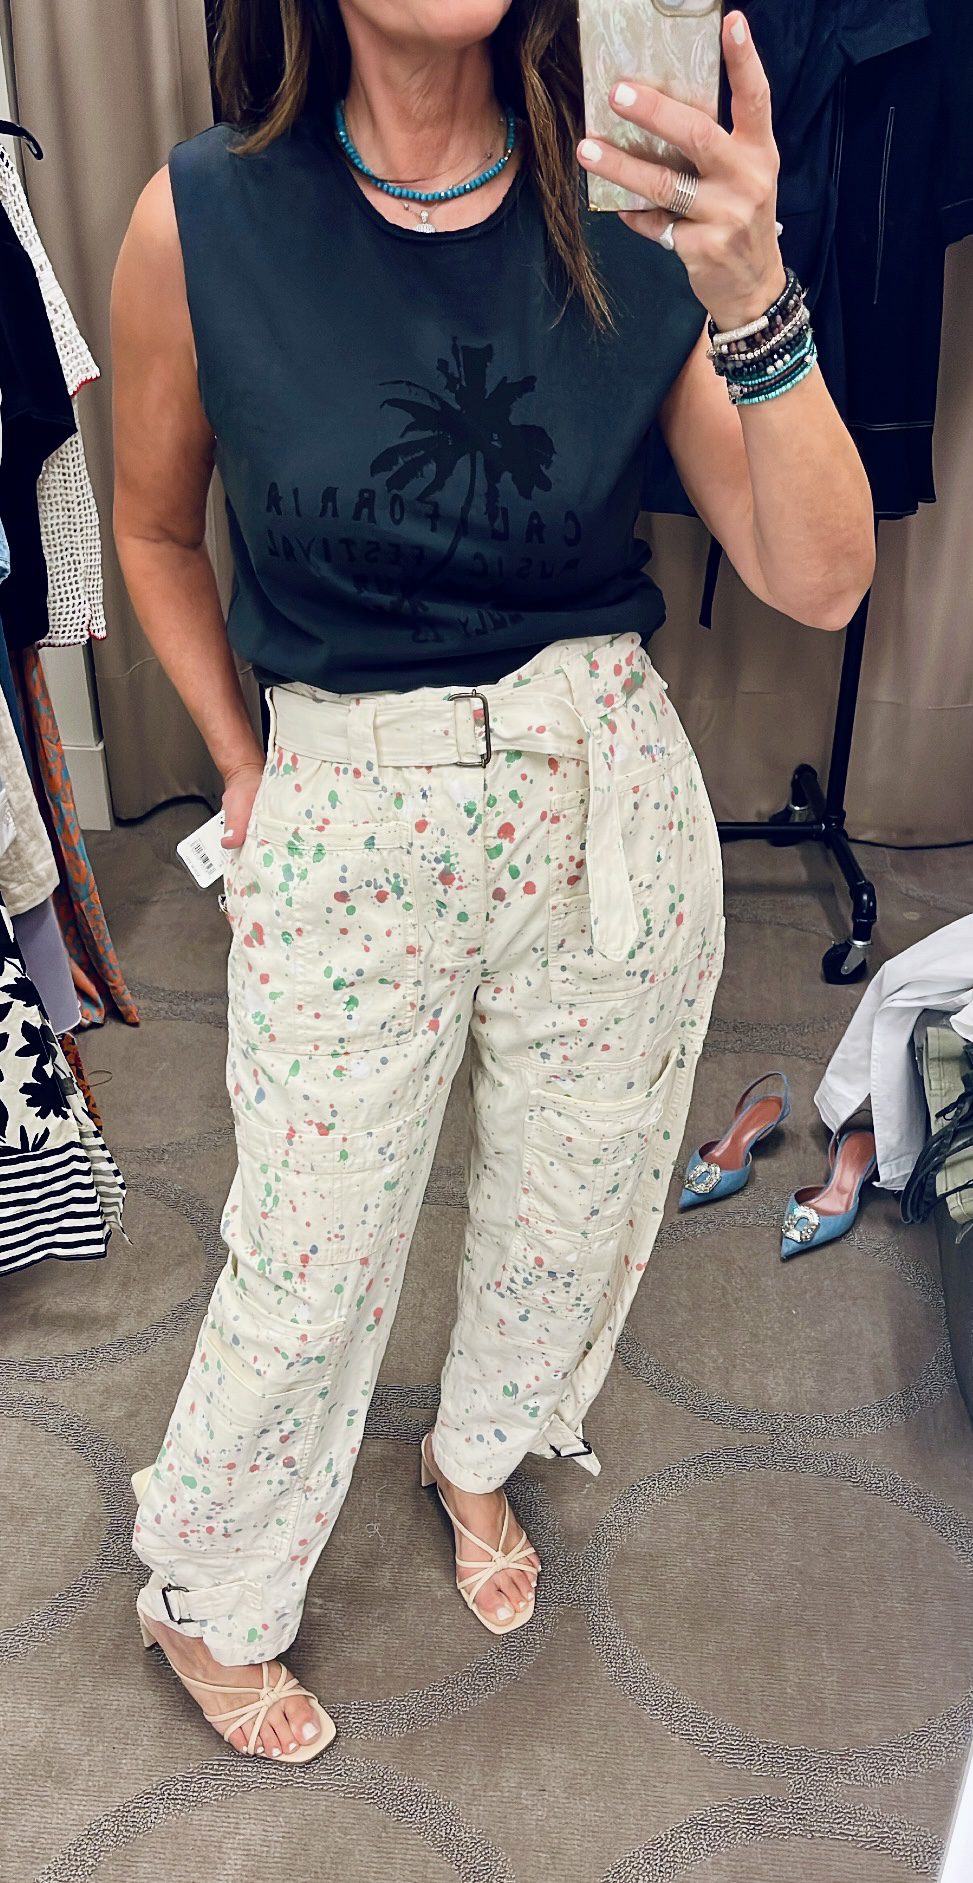 Free People splatter paint pants are fun and on trend with toggled bottoms
